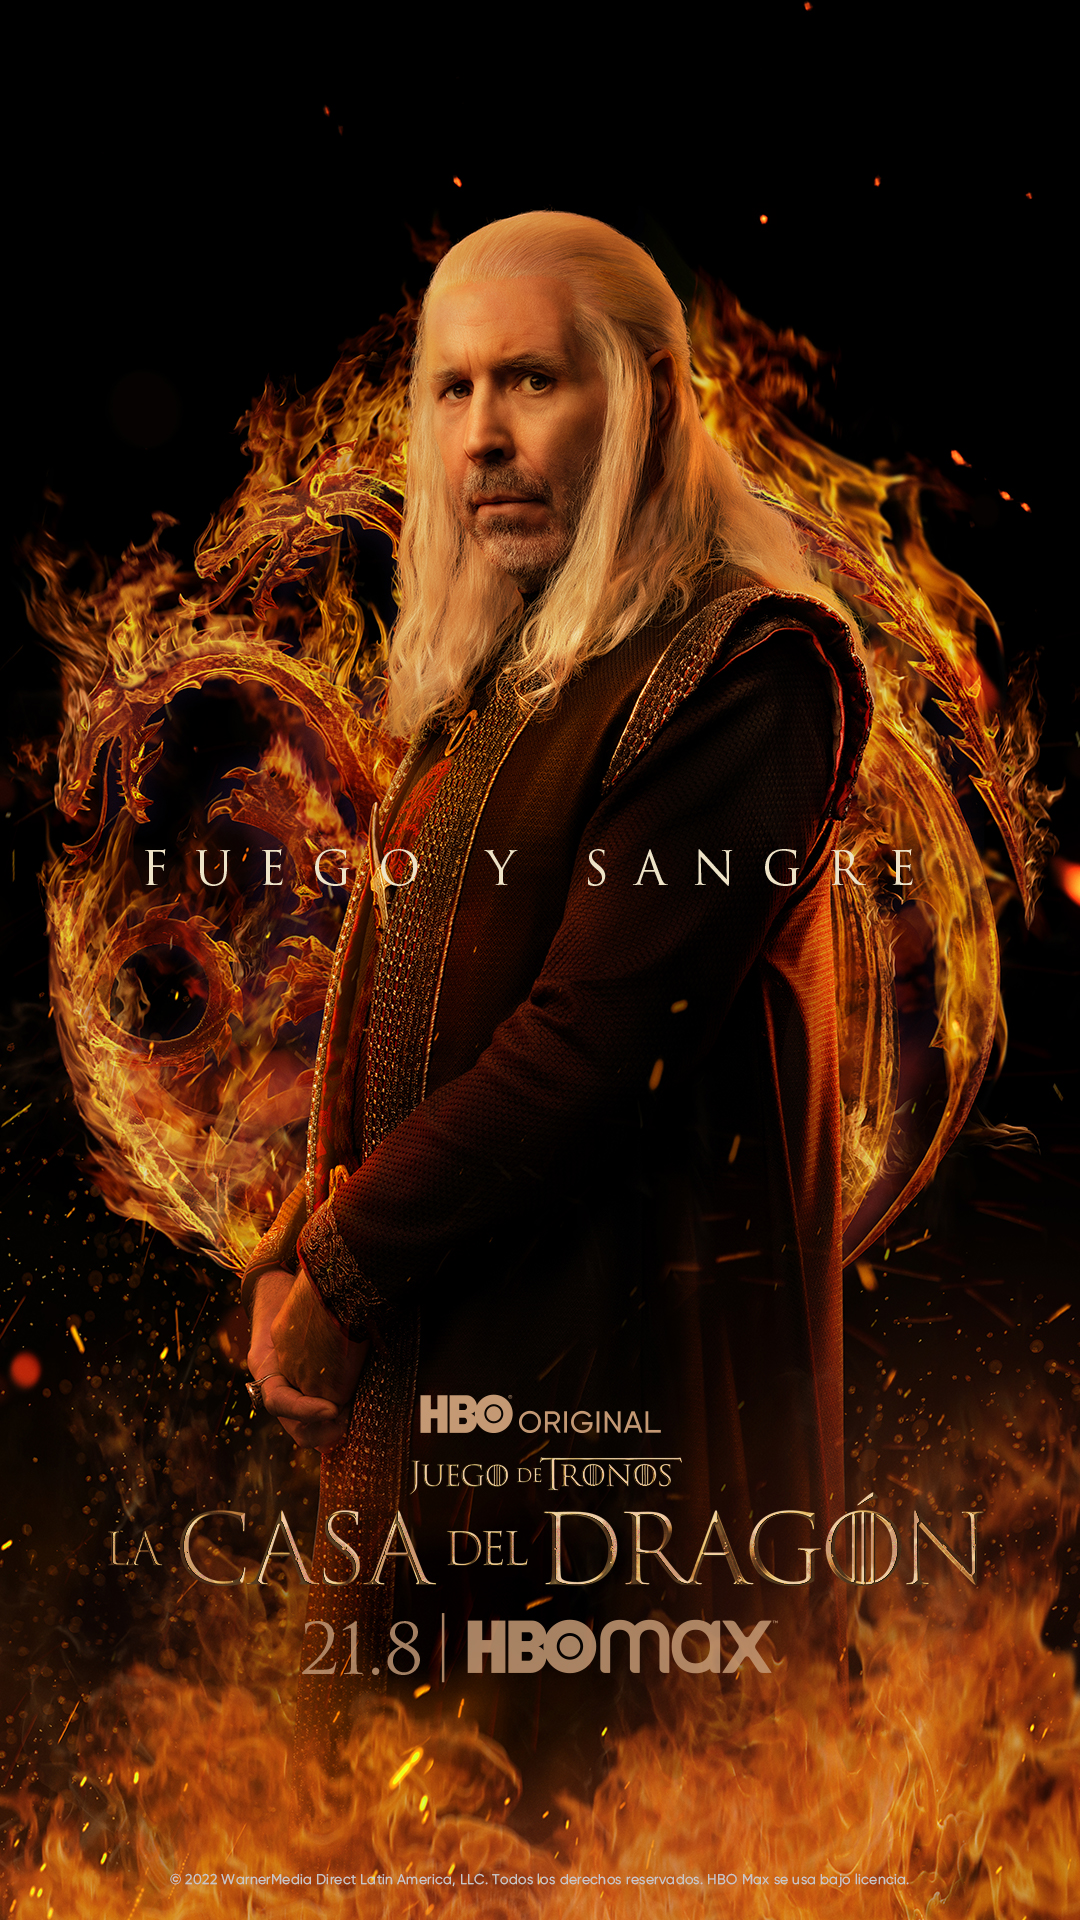 HOTD CHARACTER POSTER HBO